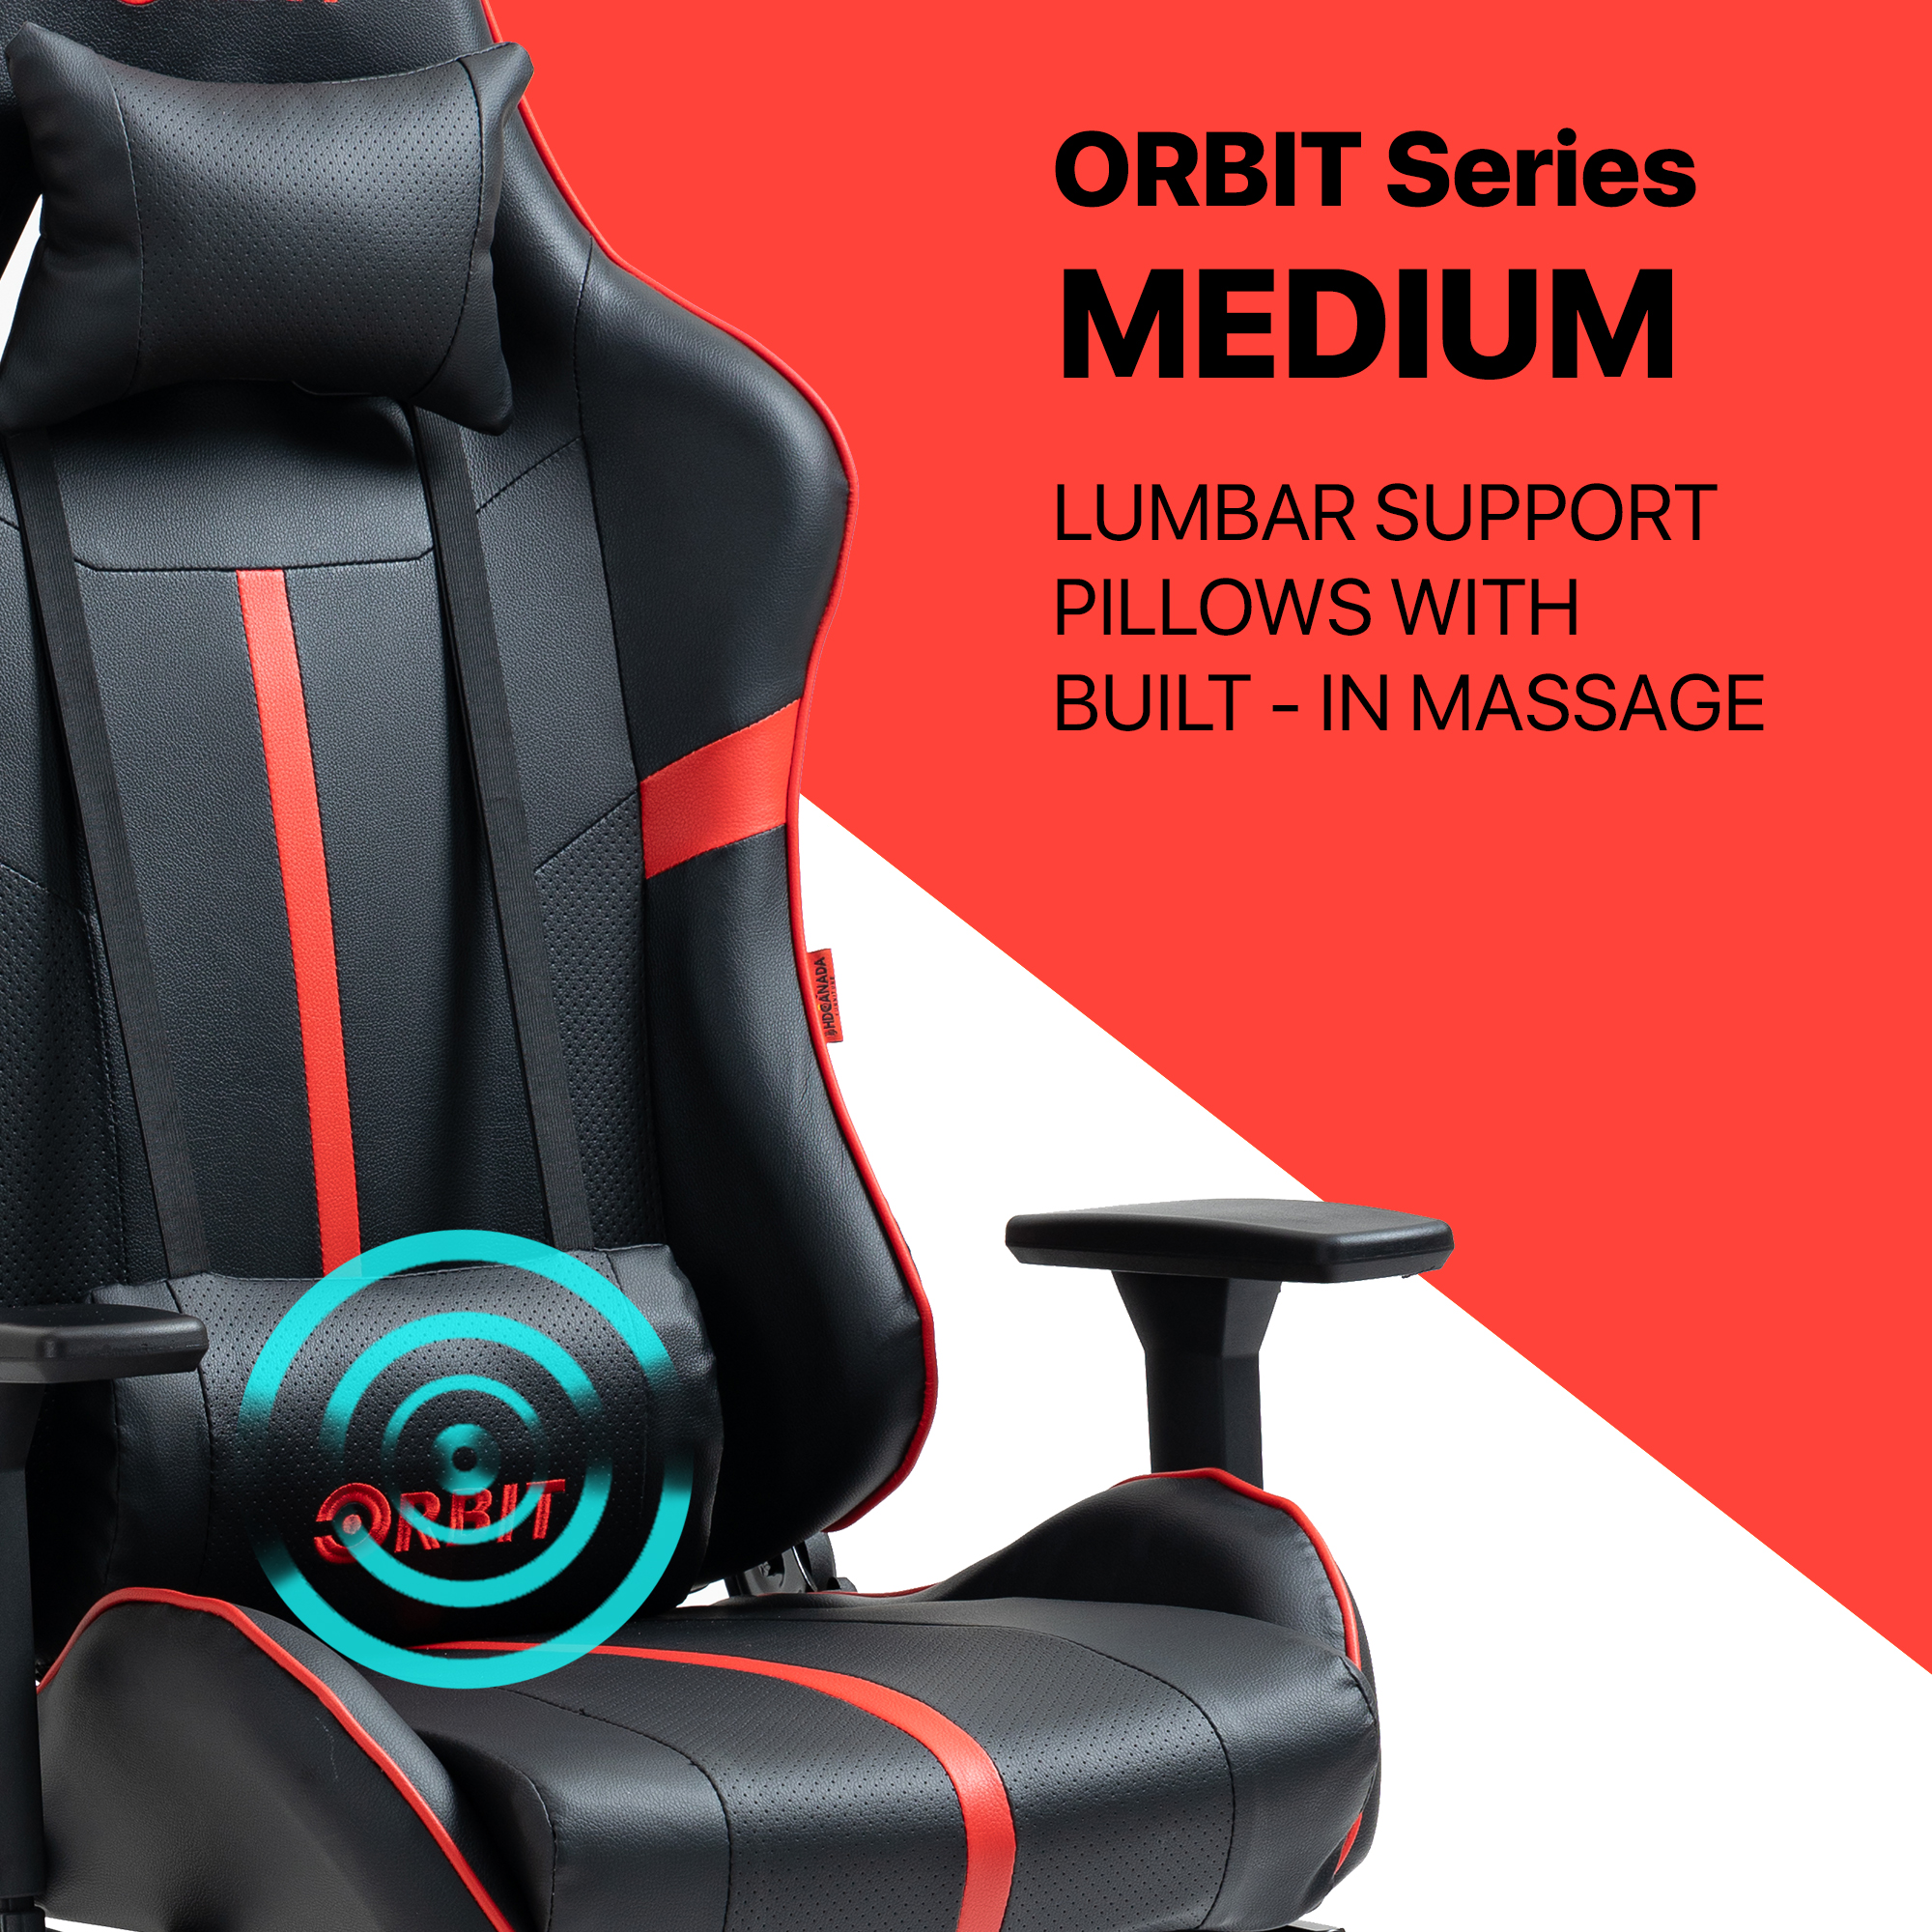 Both the headrest and lumbar massage pillows add an extra layer of comfort Orbit Series Gaming Chair